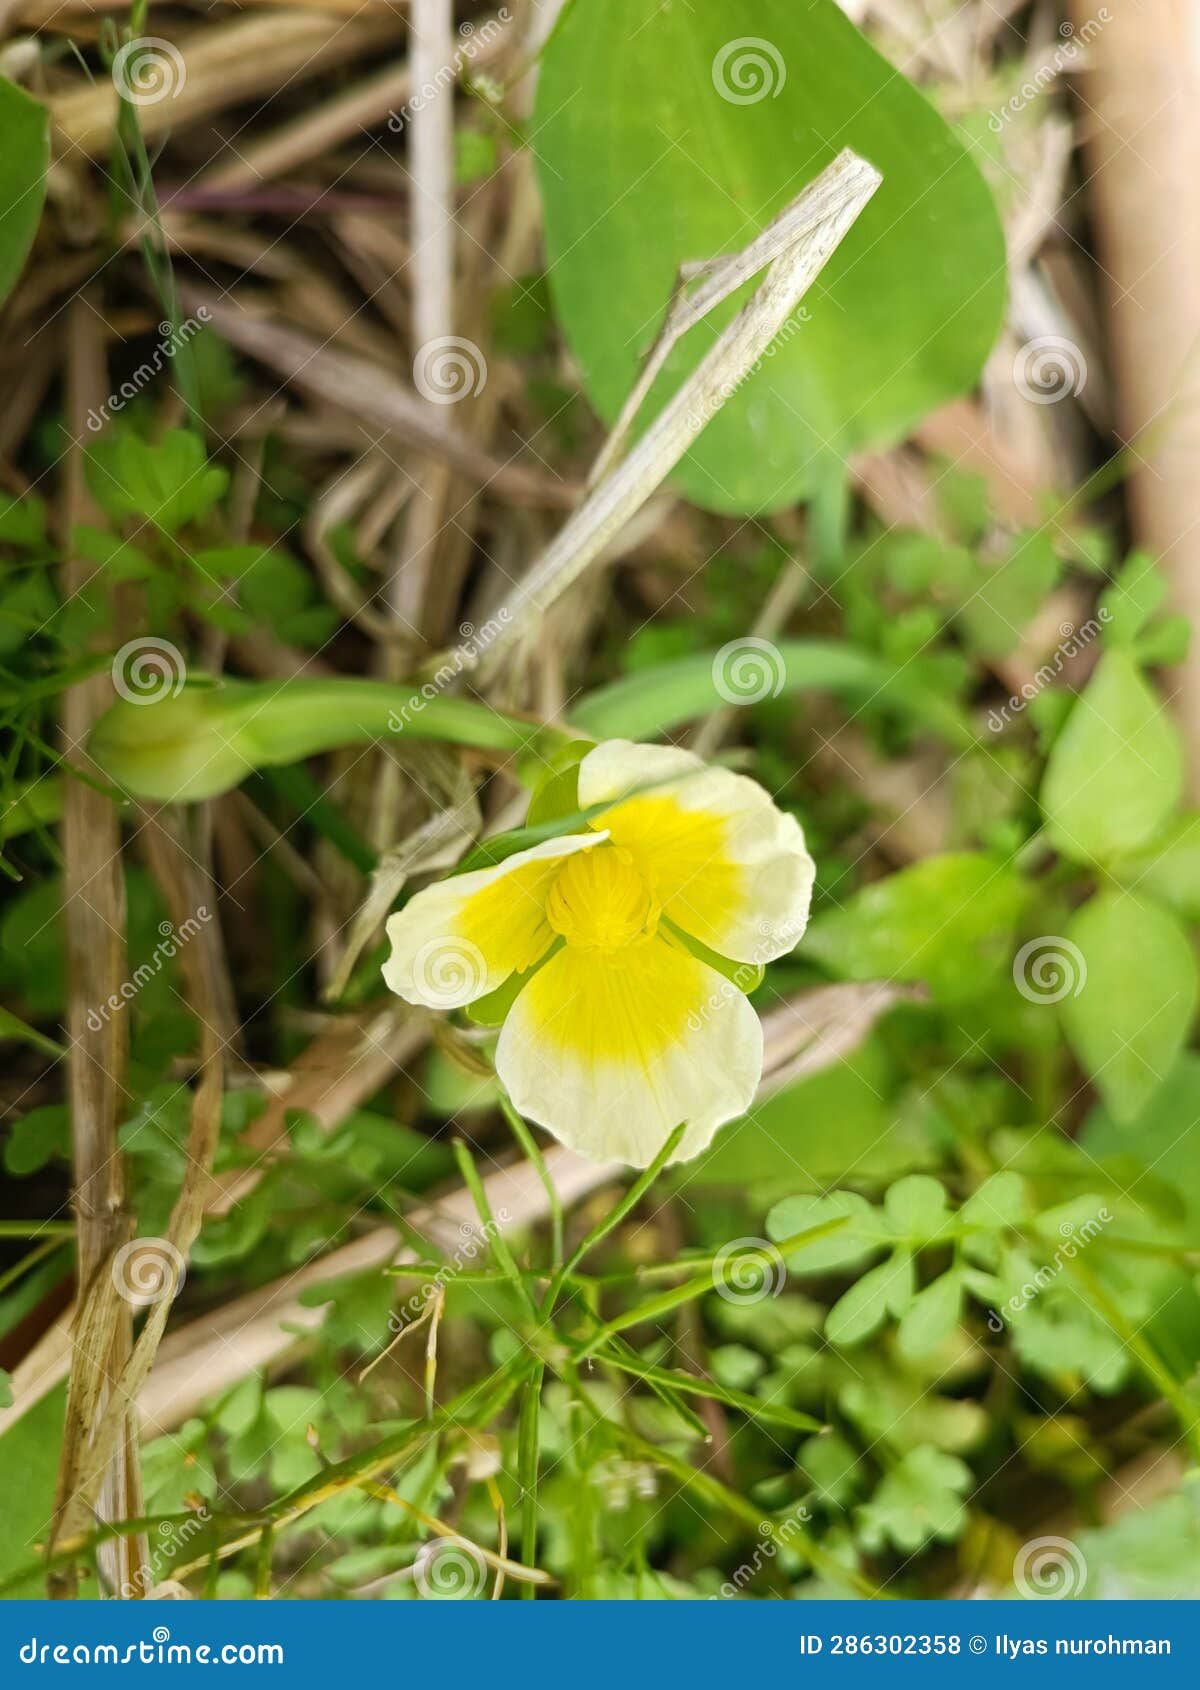 a yellow flower with a yellow center and a yellow flower with the word quot on it